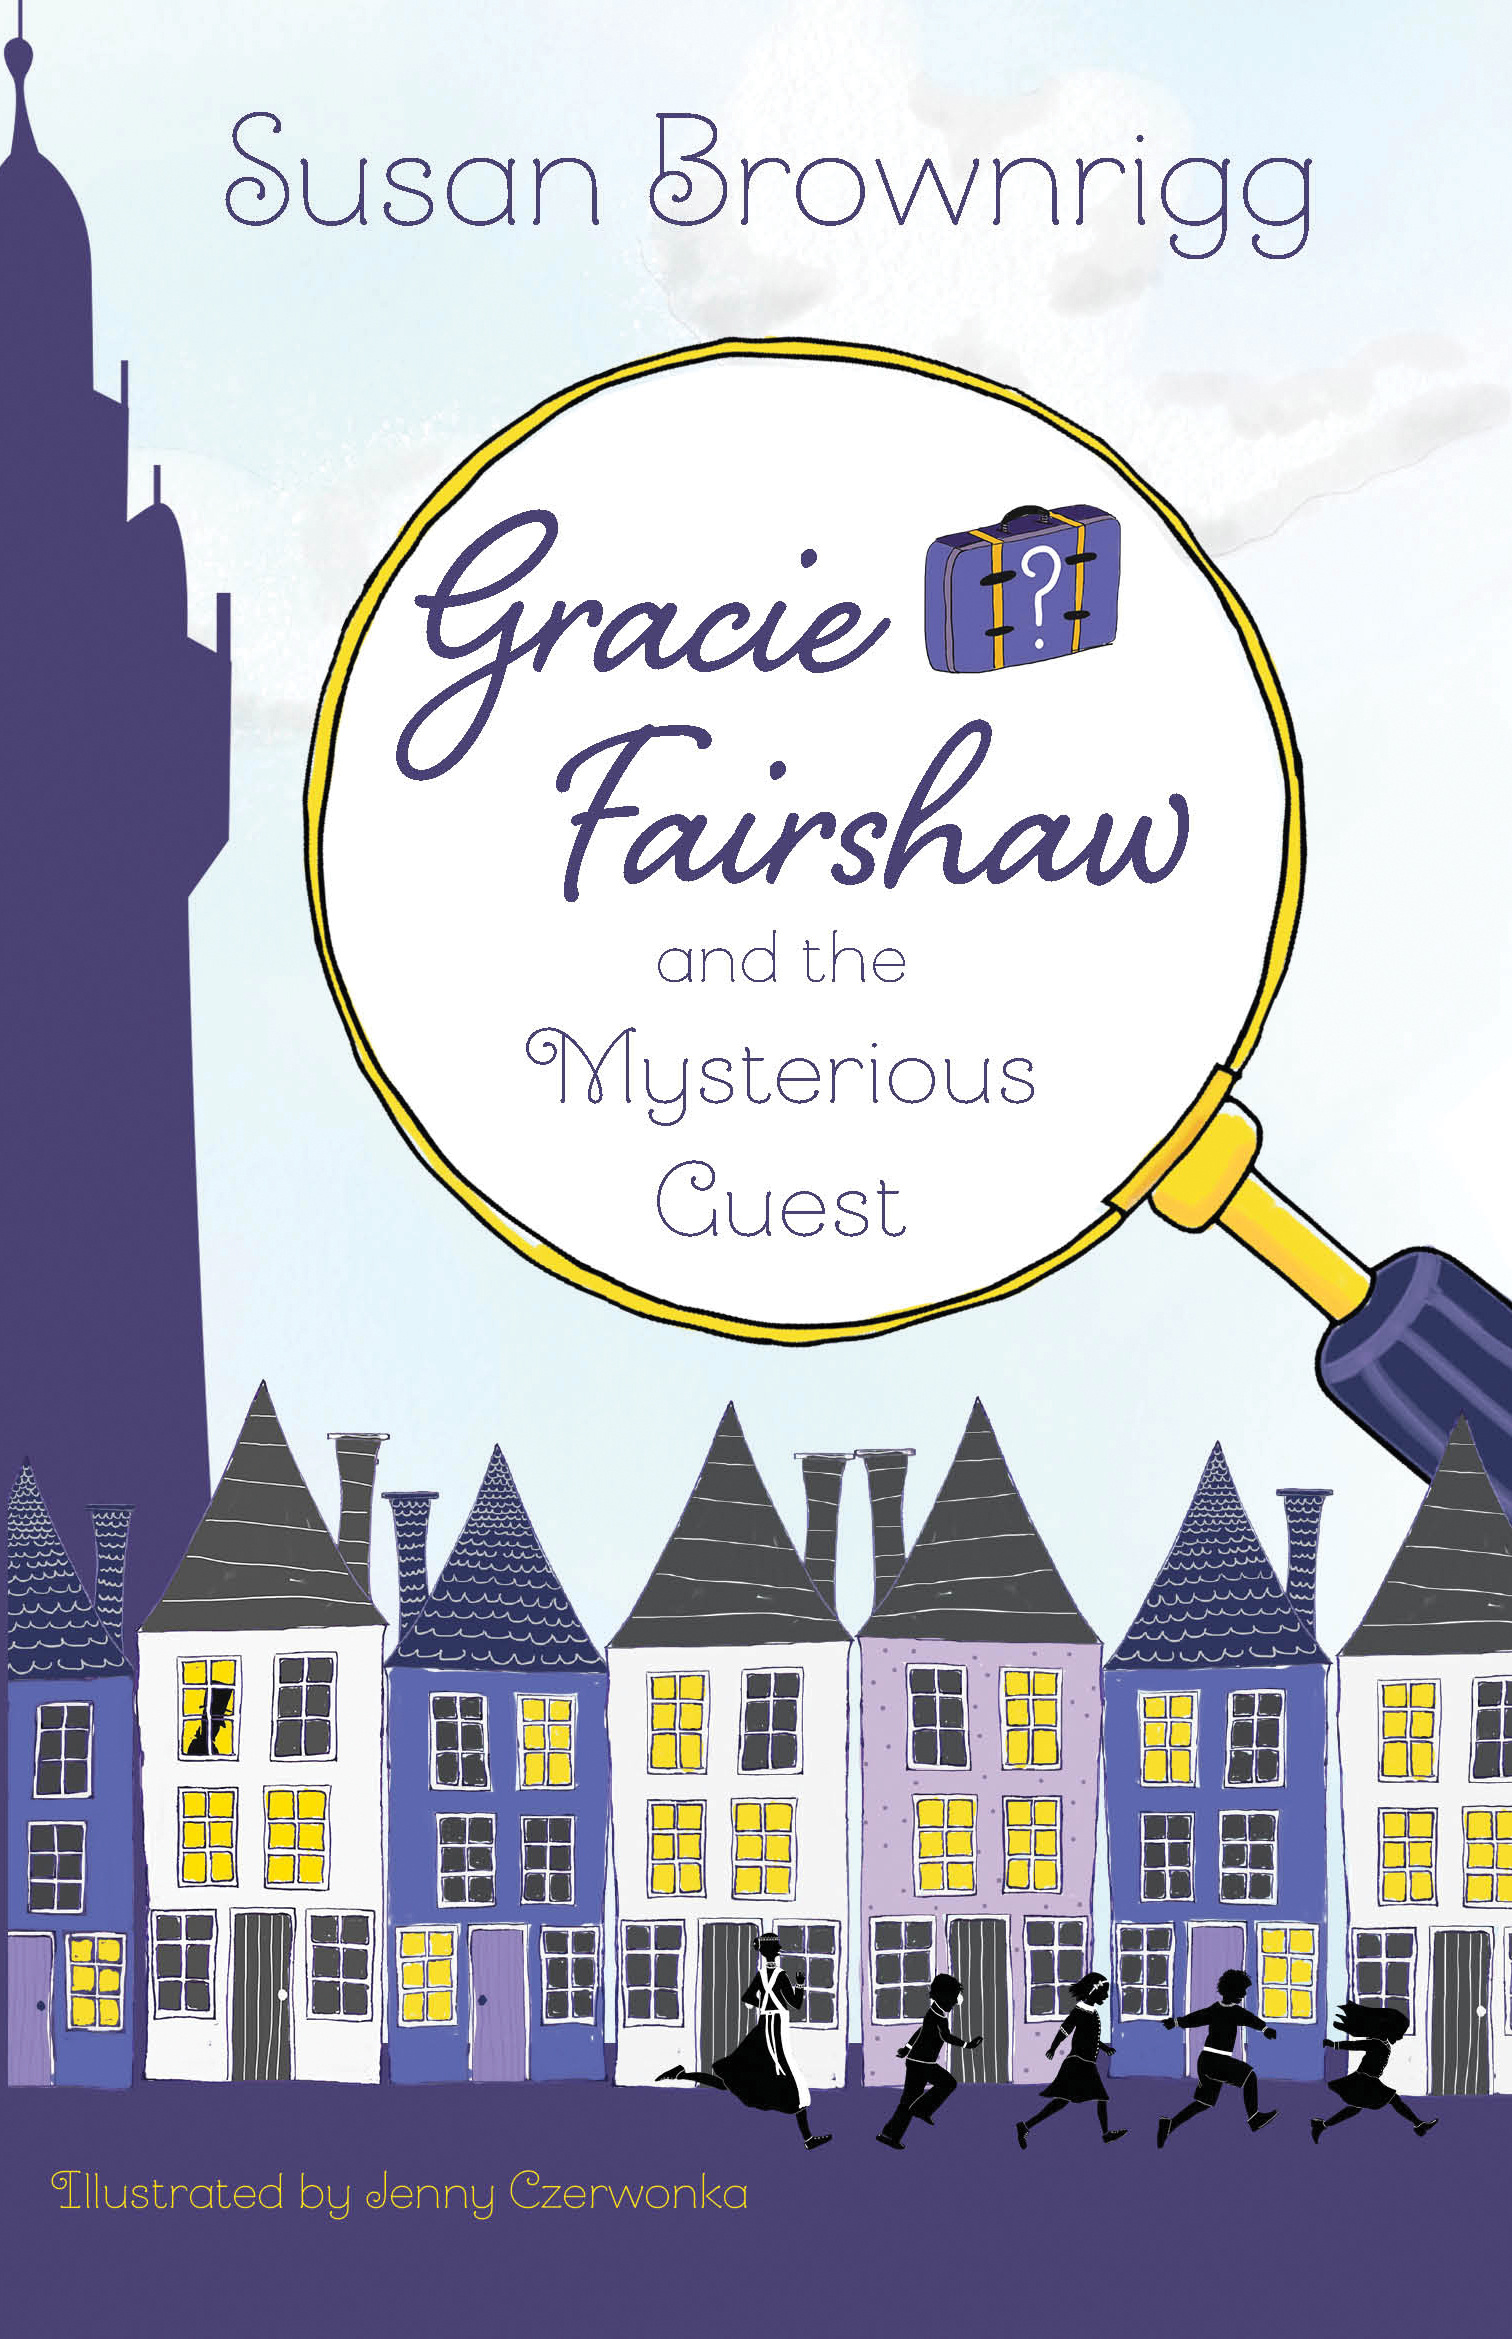 https://0201.nccdn.net/1_2/000/000/17f/0a7/cover-reveal-Gracie-Fairshaw-and-the-Mysterious-Guest-1512x2339.jpg